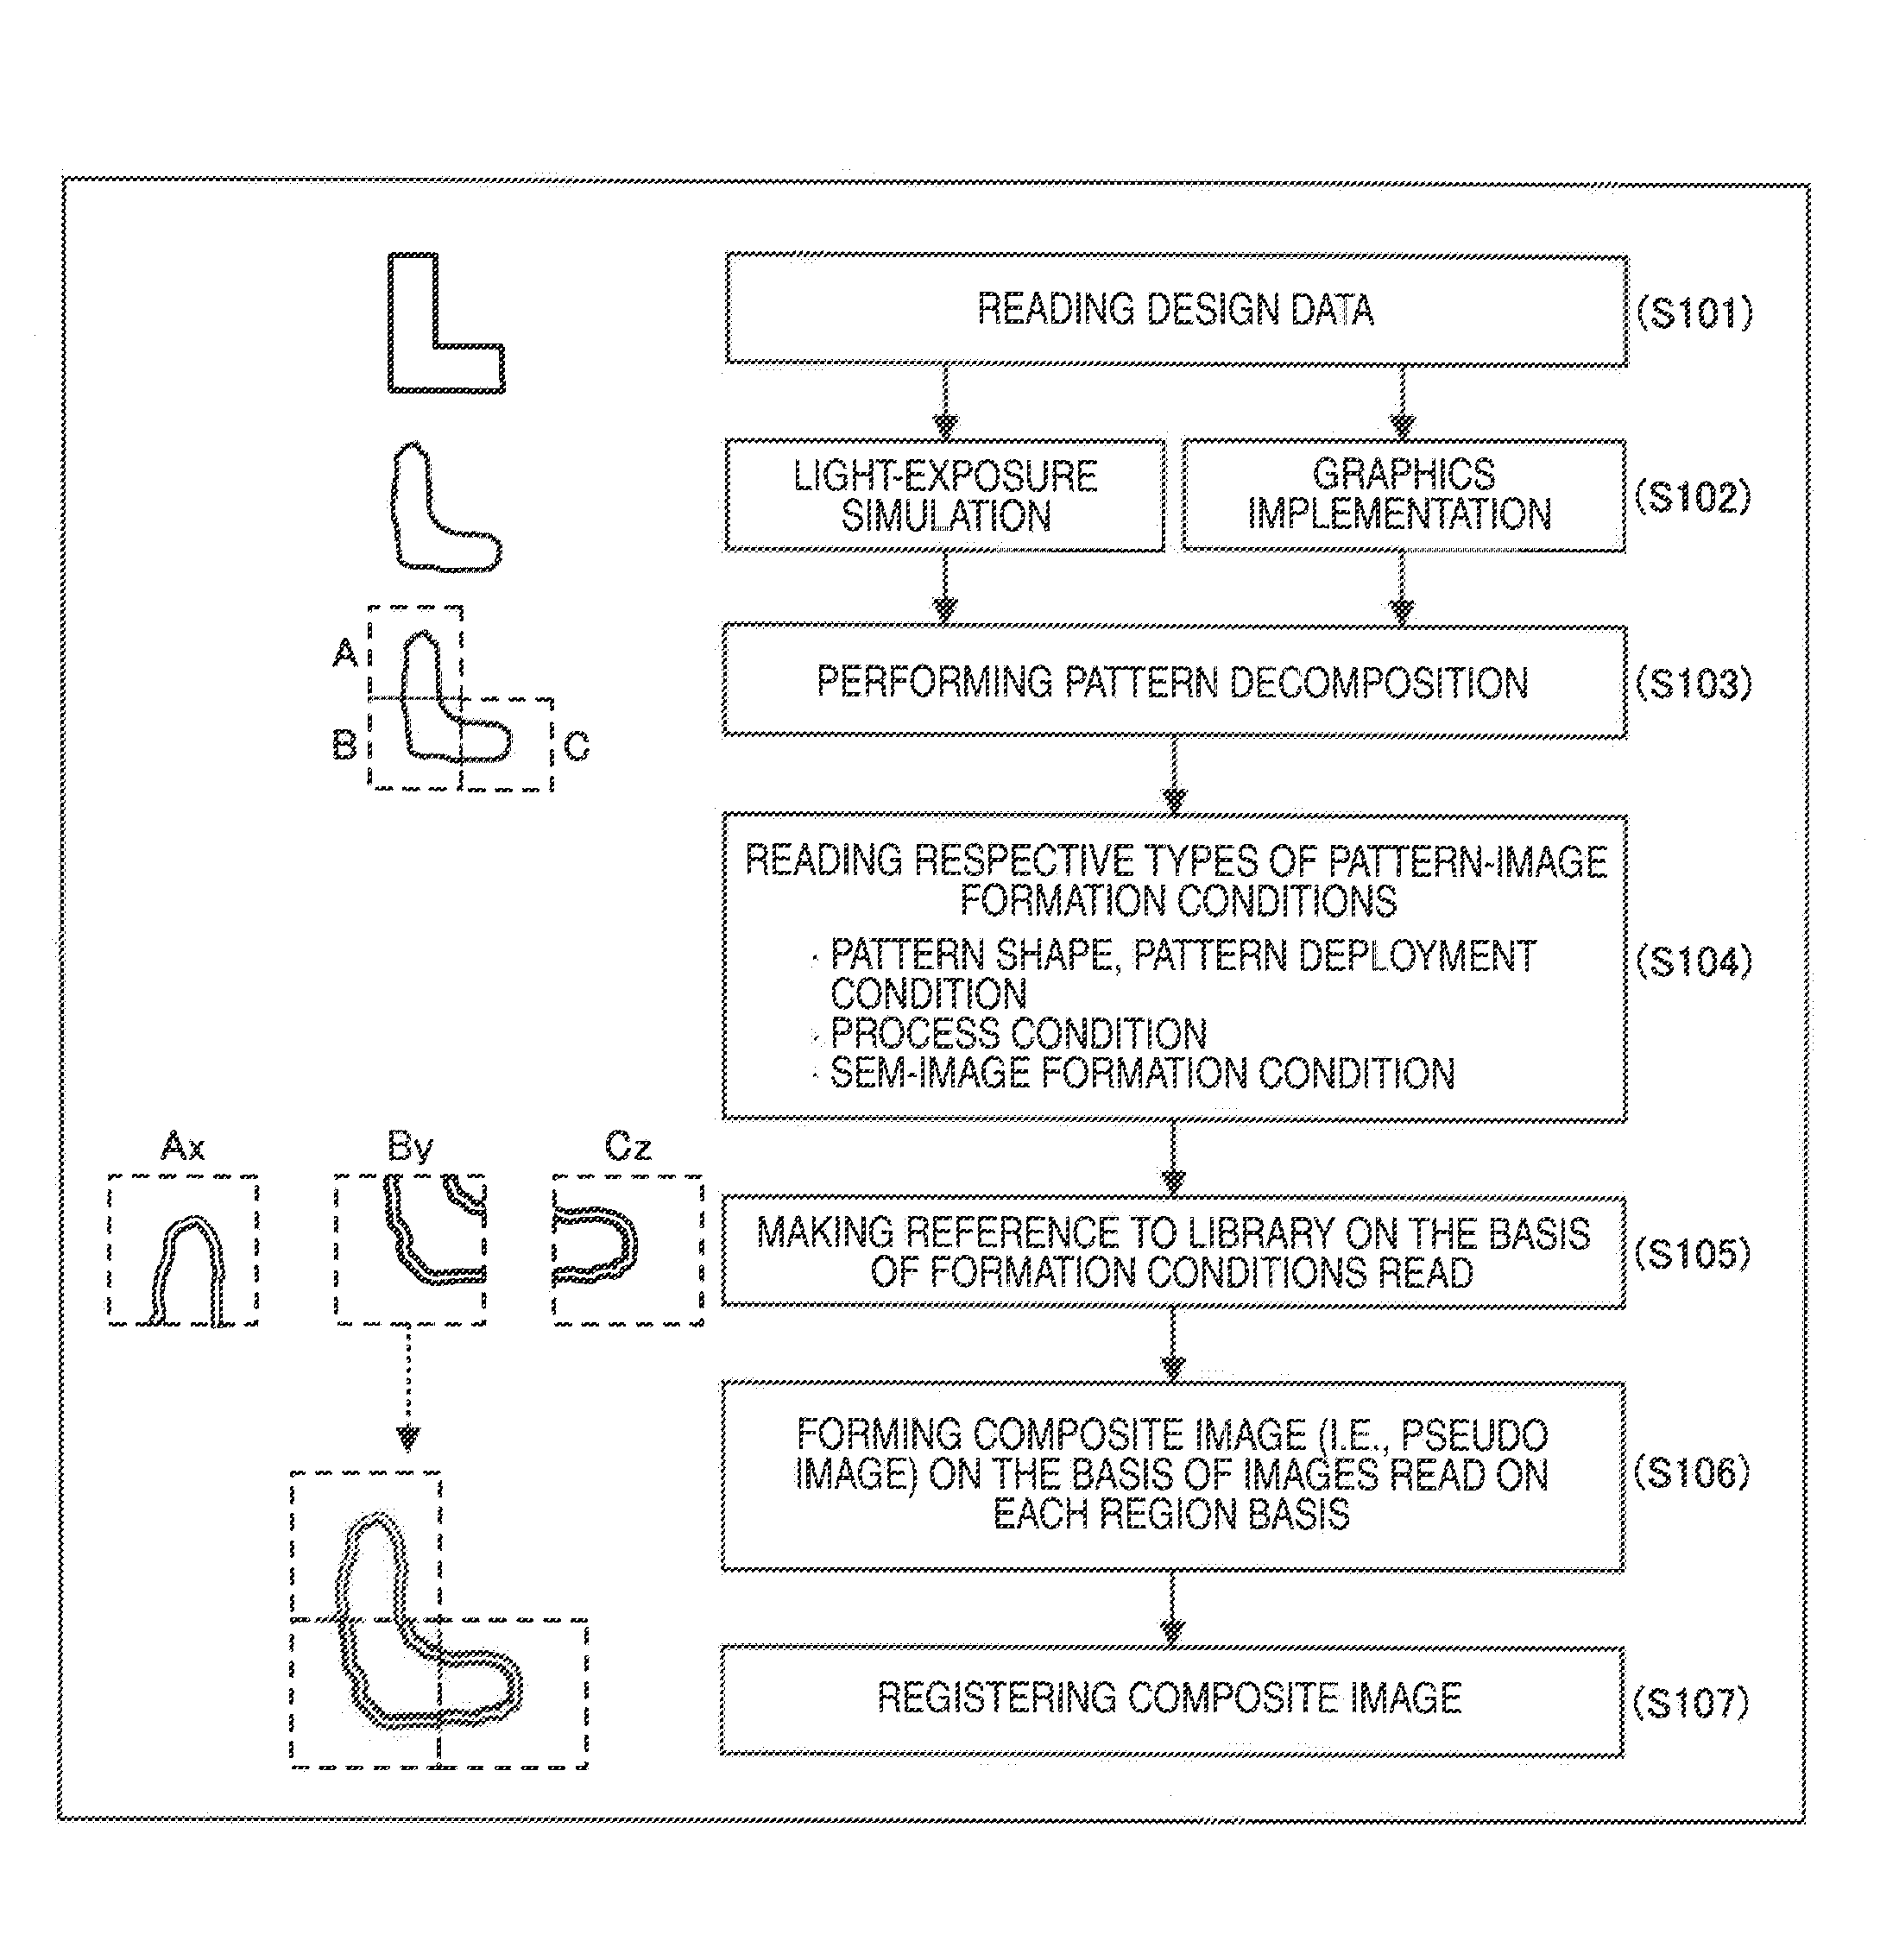 Image processing device and computer program for performing image processing